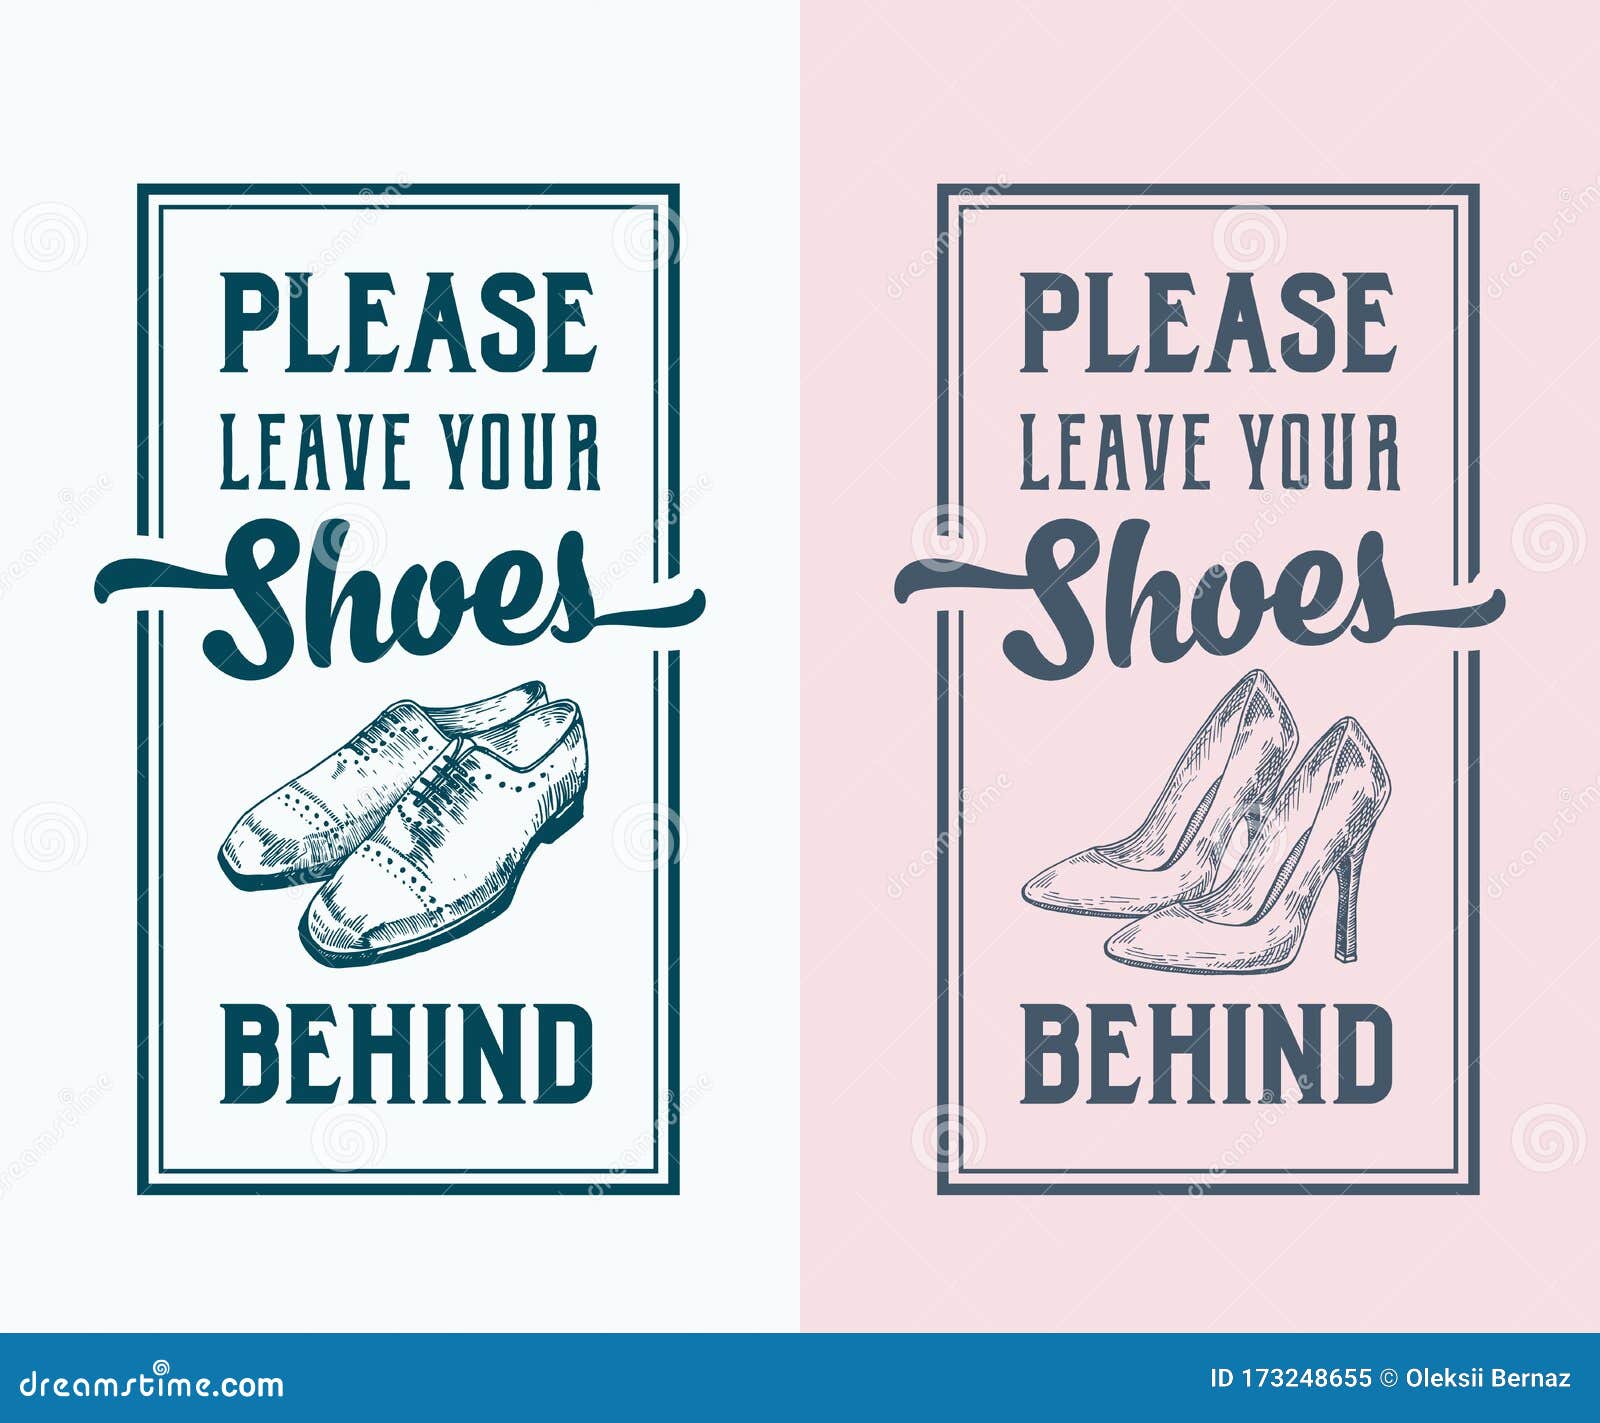 PLEASE REMOVE YOUR SHOES HERE - Keep Calm and Posters Generator, Maker For  Free - KeepCalmAndPosters.com